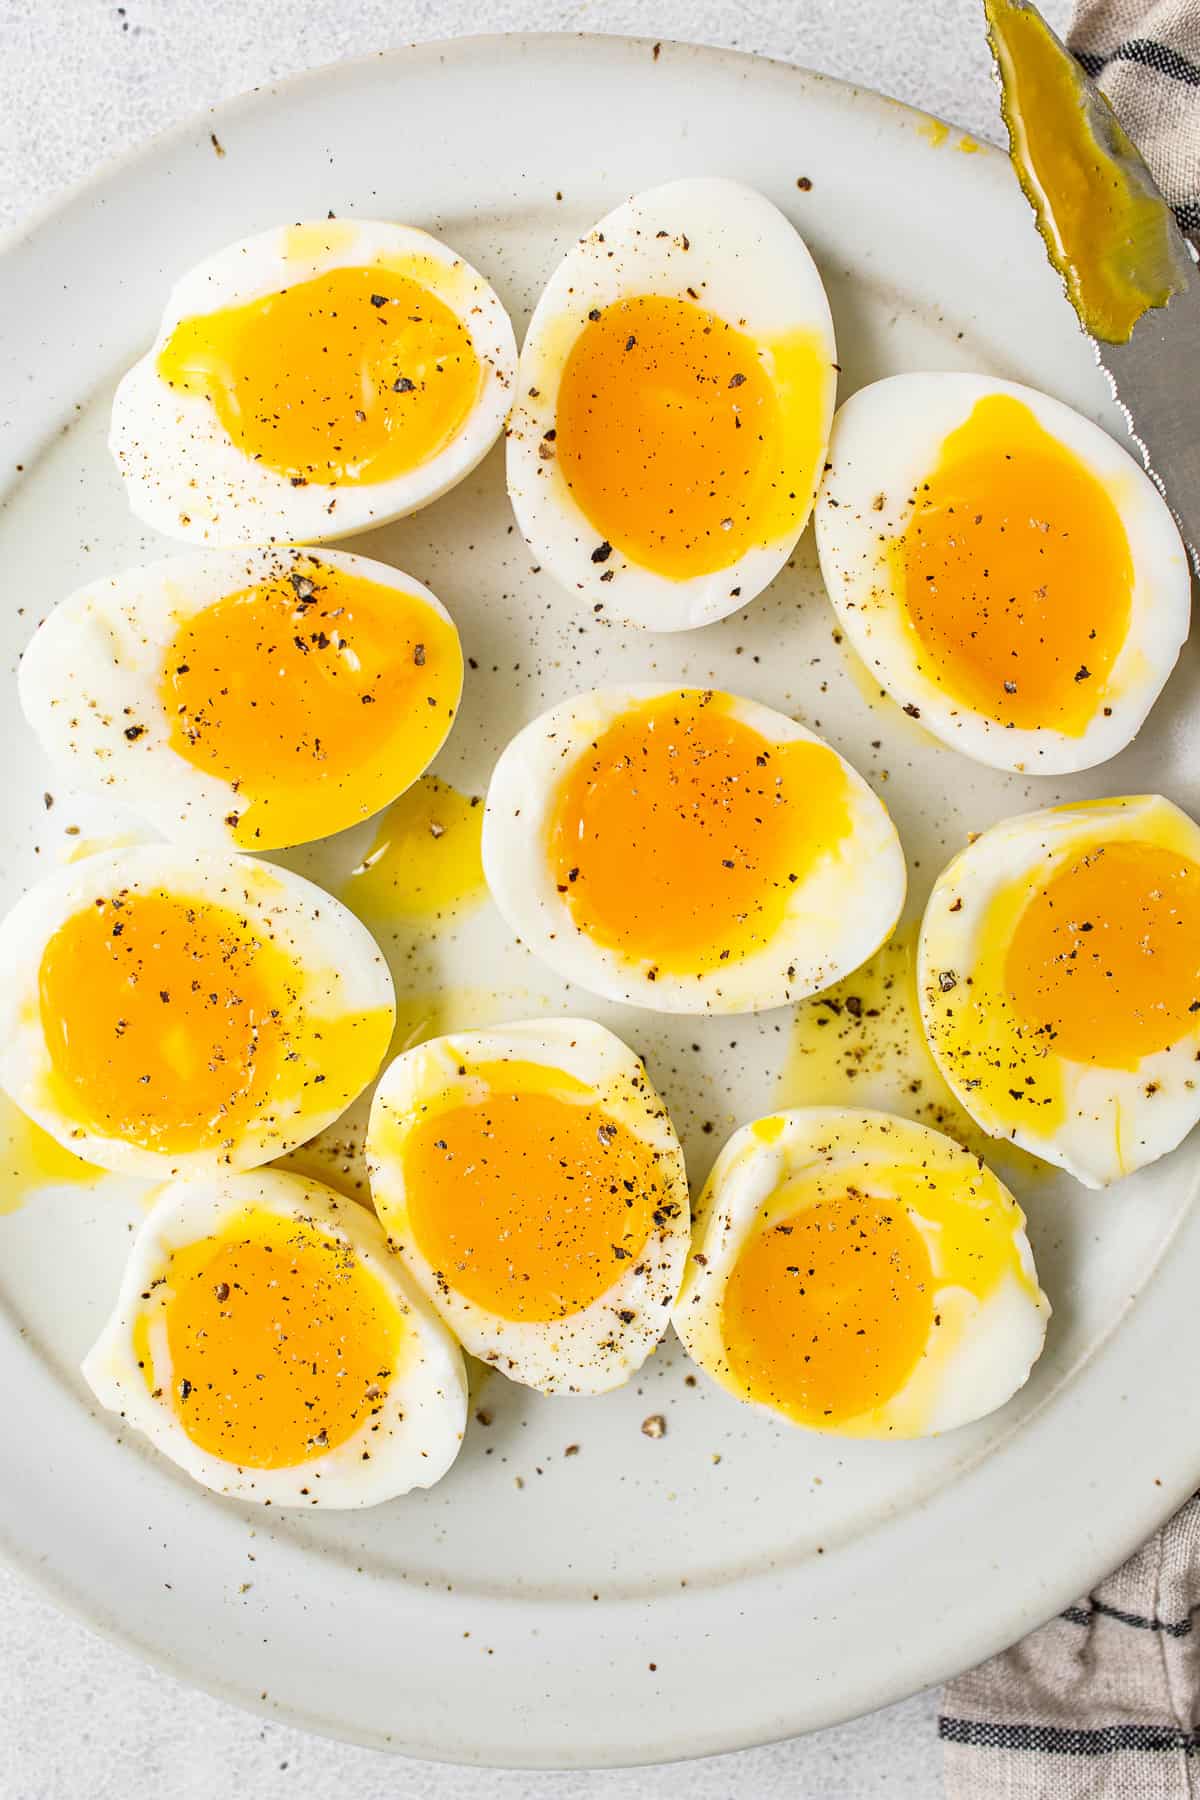 Soft boiled eggs on a plate.